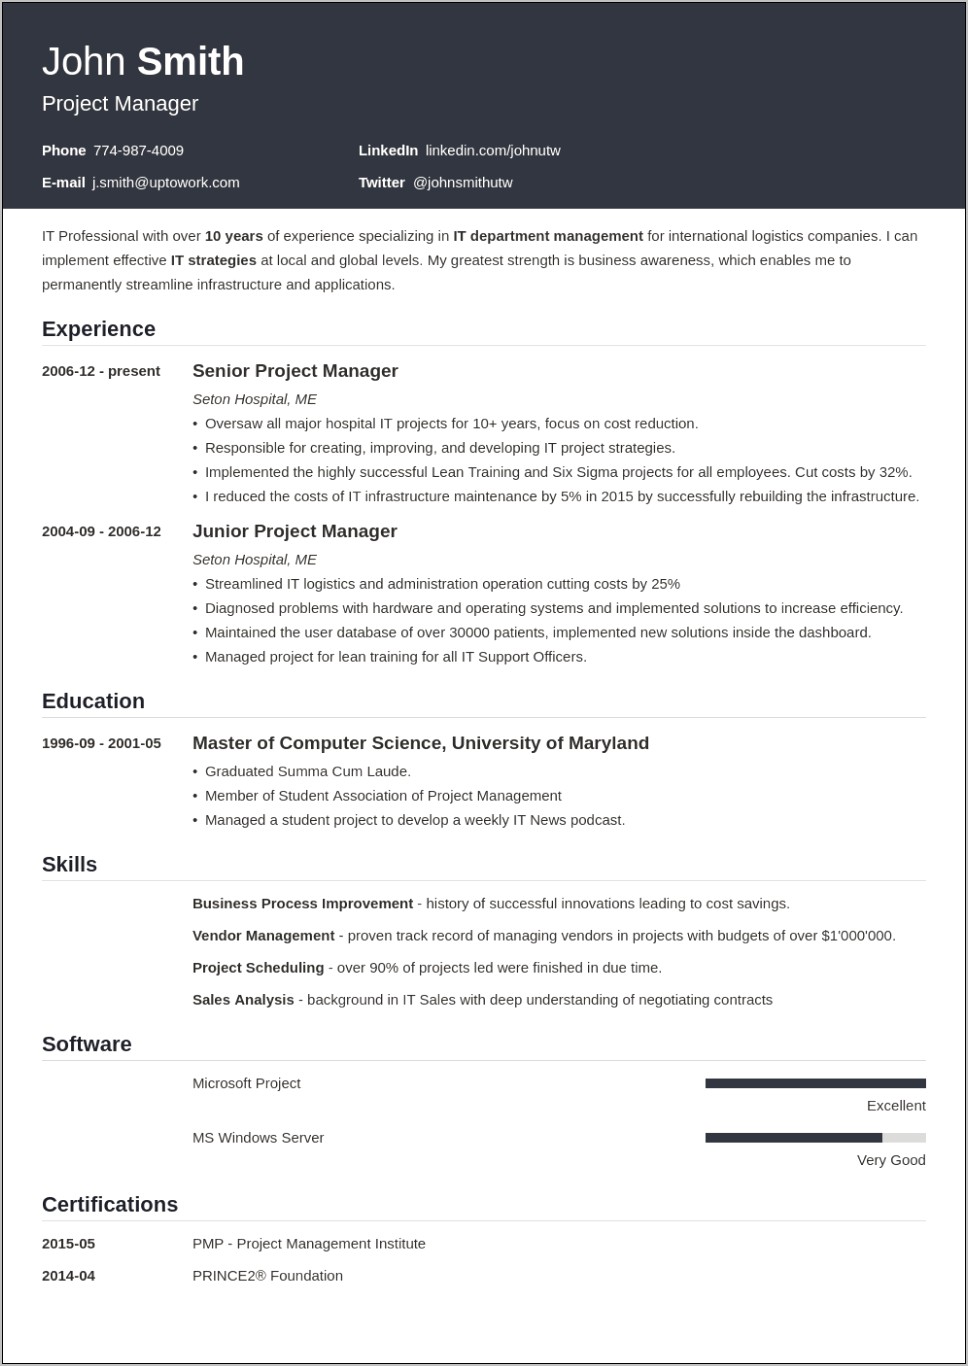 Resume Format For Any Job